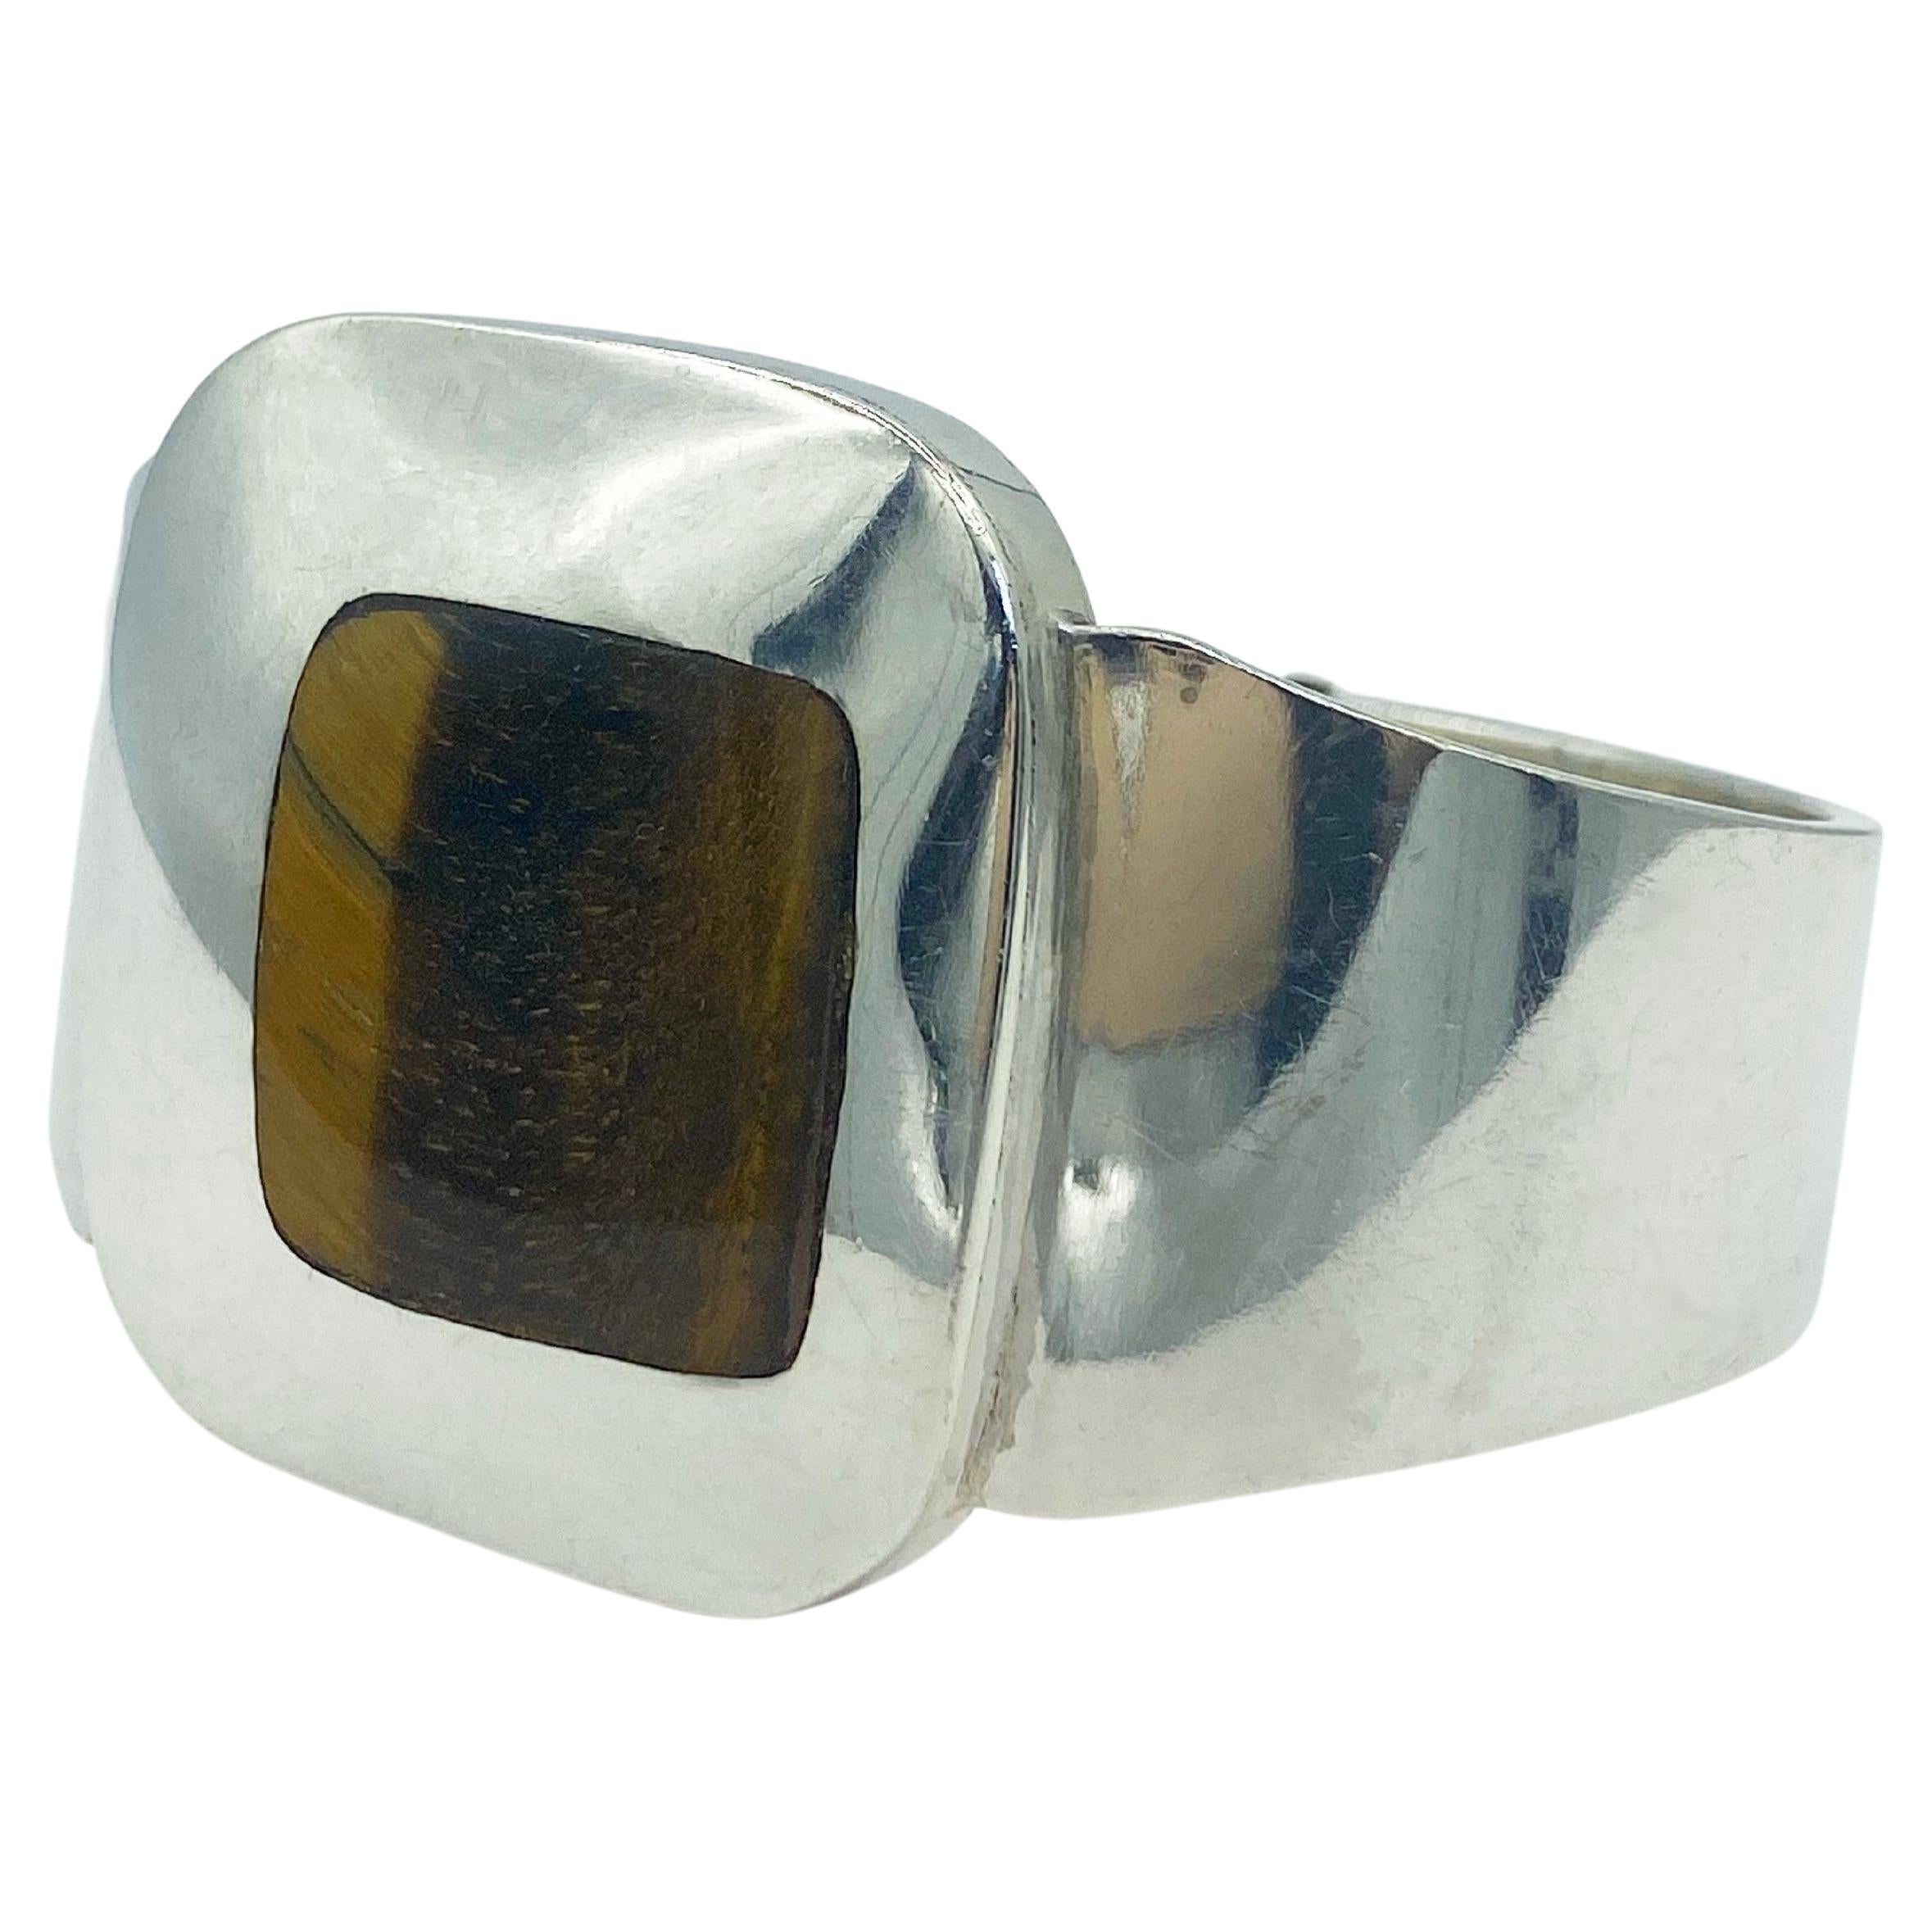 Funky, edgy, vintage Tiger's Eye and Sterling Silver clamper bracelet circa the 1960s. It has a Pop Art feel, with the Tiger's Eye stone set off-center within the domed-square face. The bracelet opens simply with a spring hinge.

Hallmarked with the